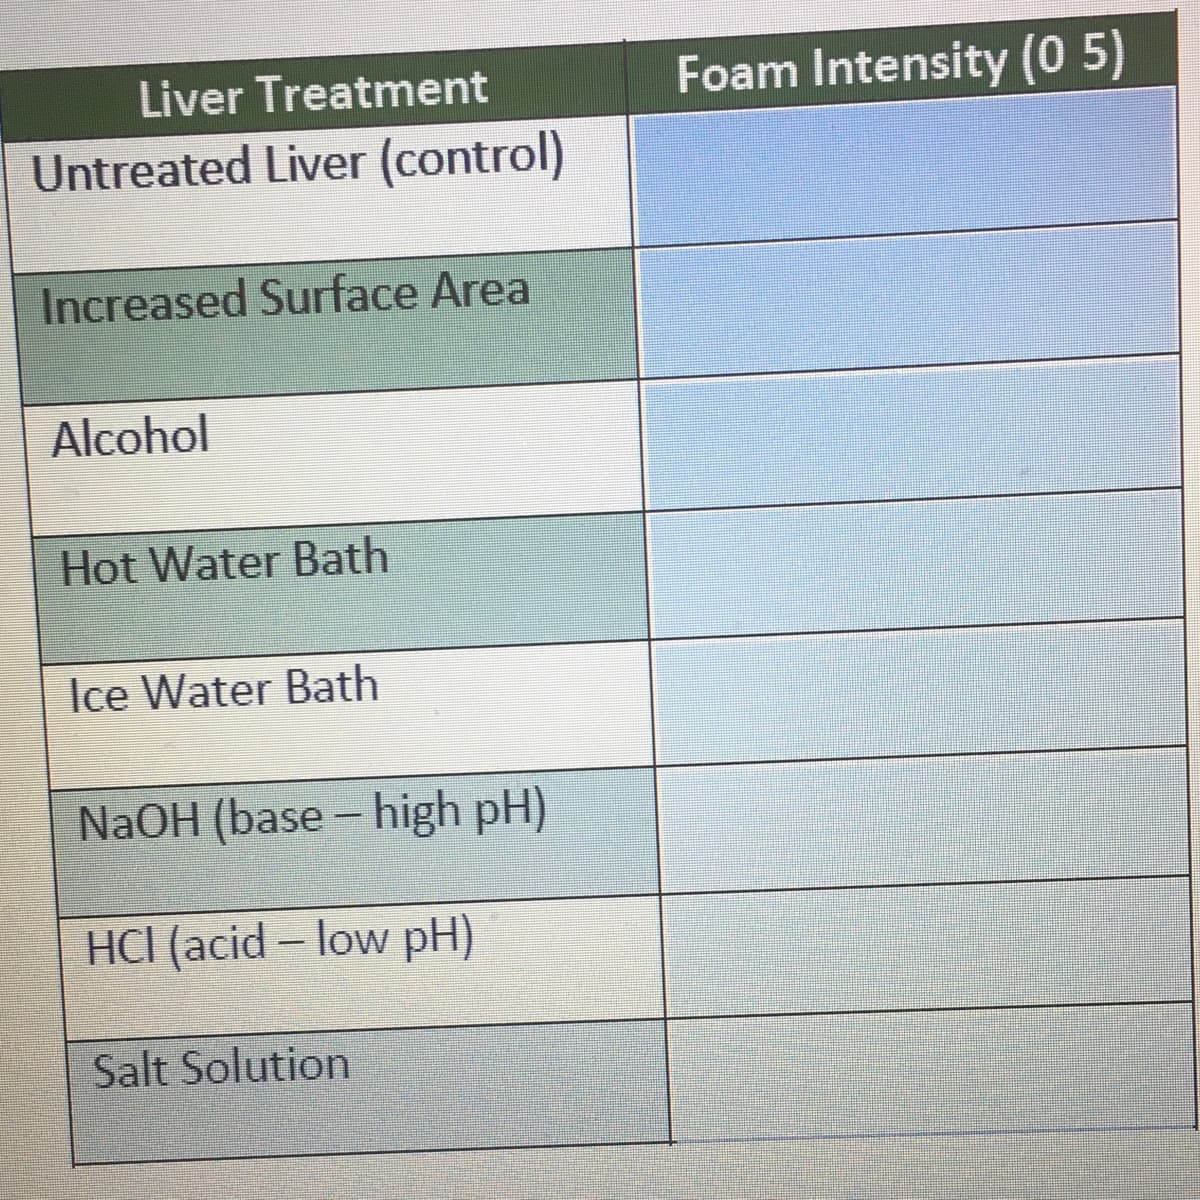 Liver Treatment
Foam Intensity (0 5)
Untreated Liver (control)
Increased Surface Area
Alcohol
Hot Water Bath
Ice Water Bath
NaOH (base – high pH)
HCI (acid - low pH)
Salt Solution
